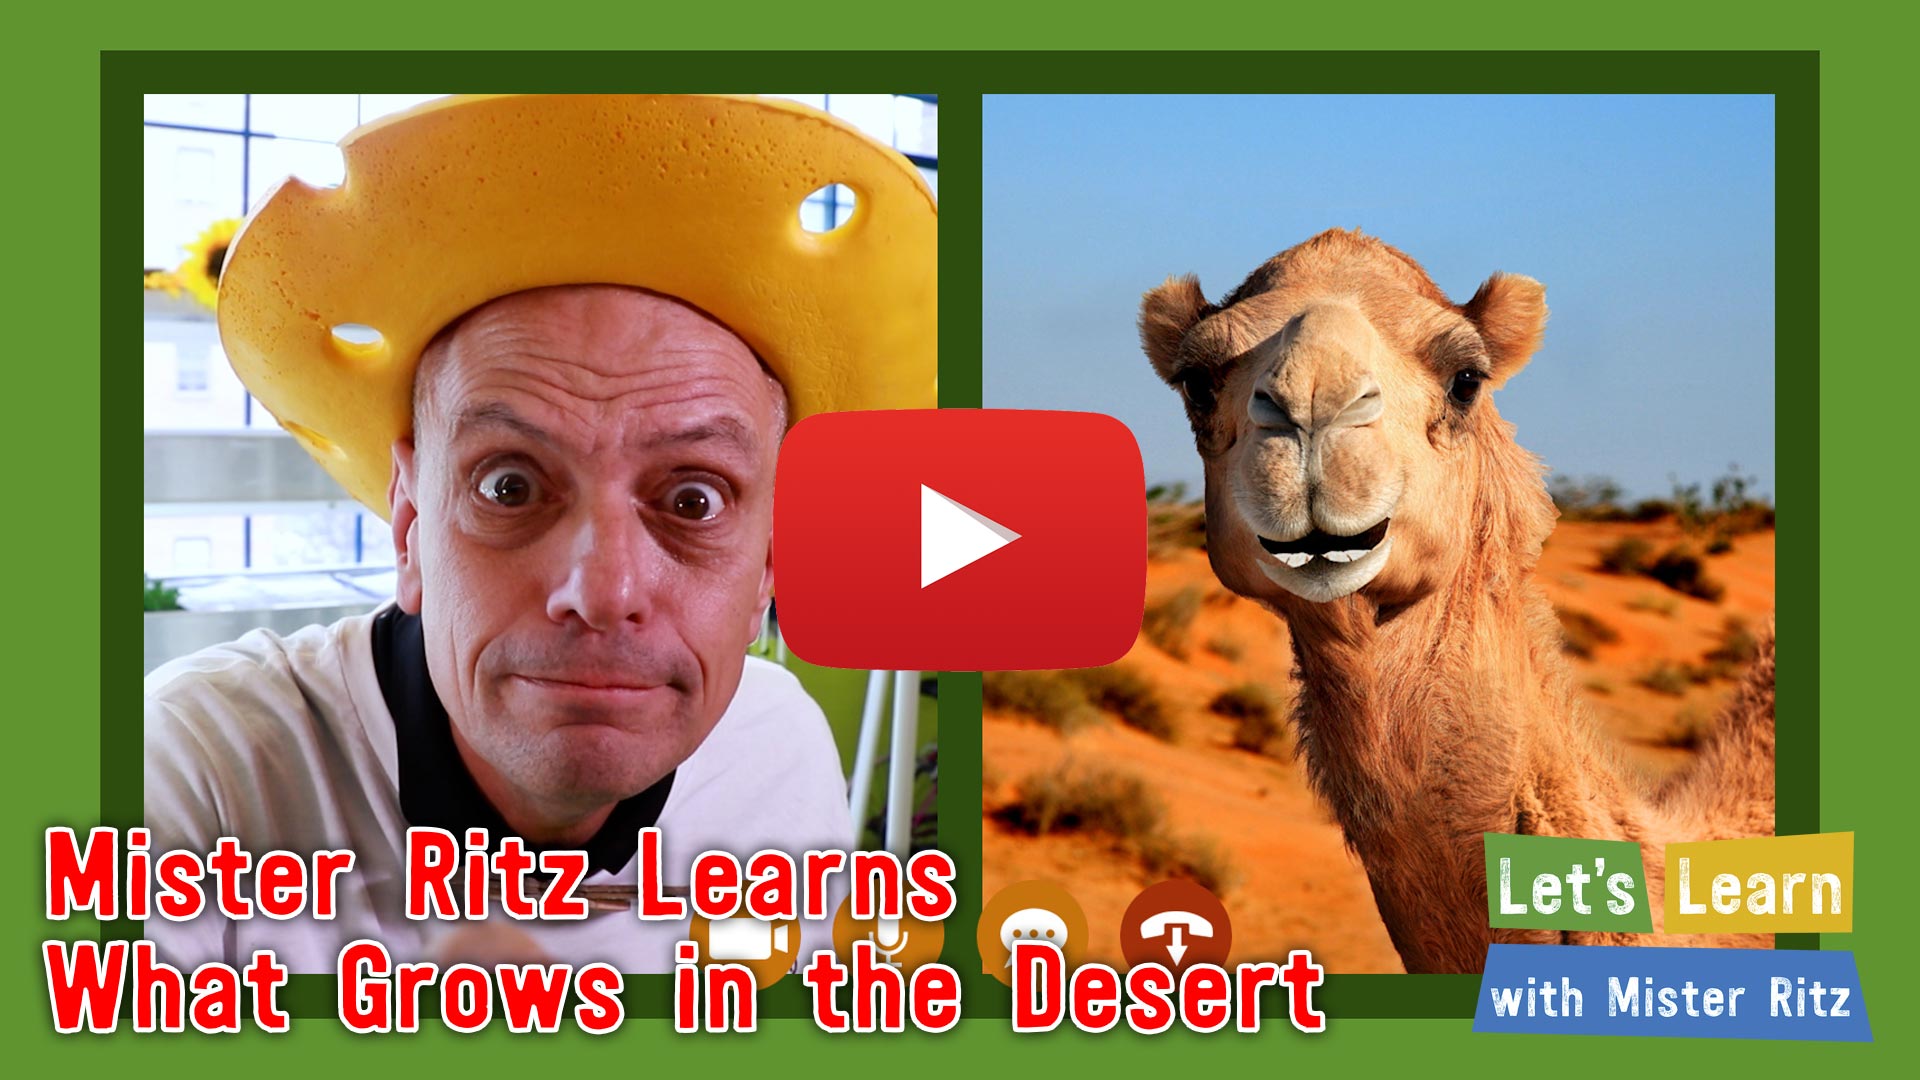 Lets-Learn-with-Mister-Ritz-What-Grows-in-the-Desert